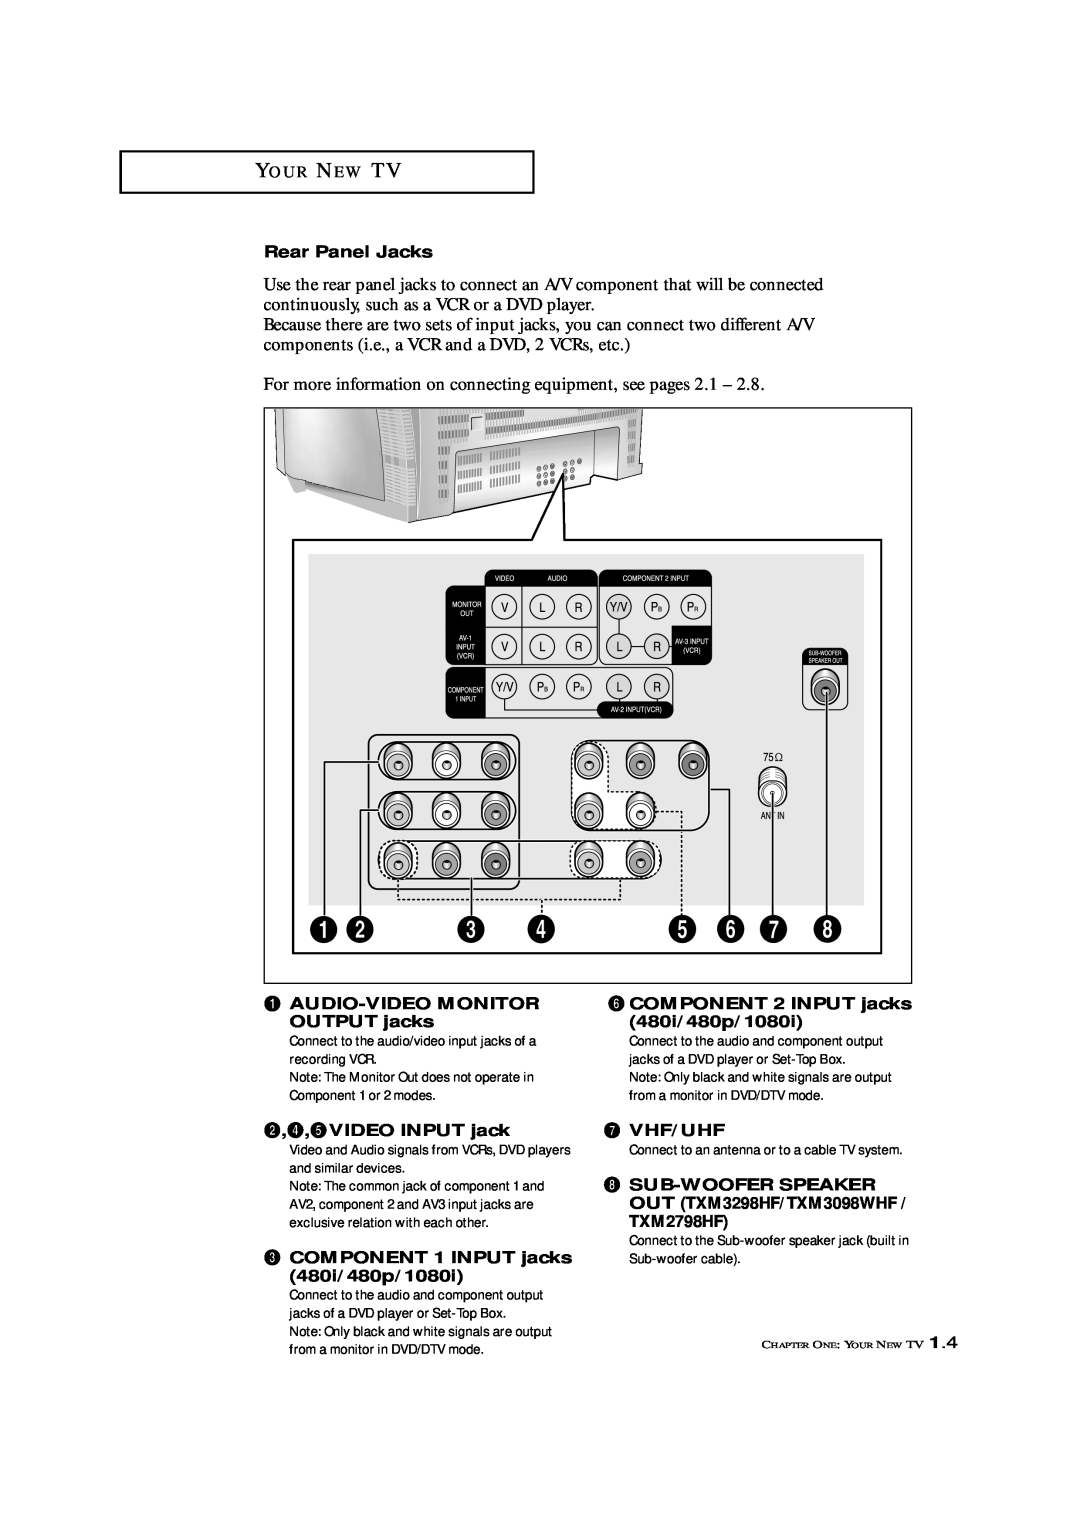 Samsung TXM 3297HF, TXM 2796HF, TXM 3098WHF, TXM 2798HF manual For more information on connecting equipment, see pages 2.1 